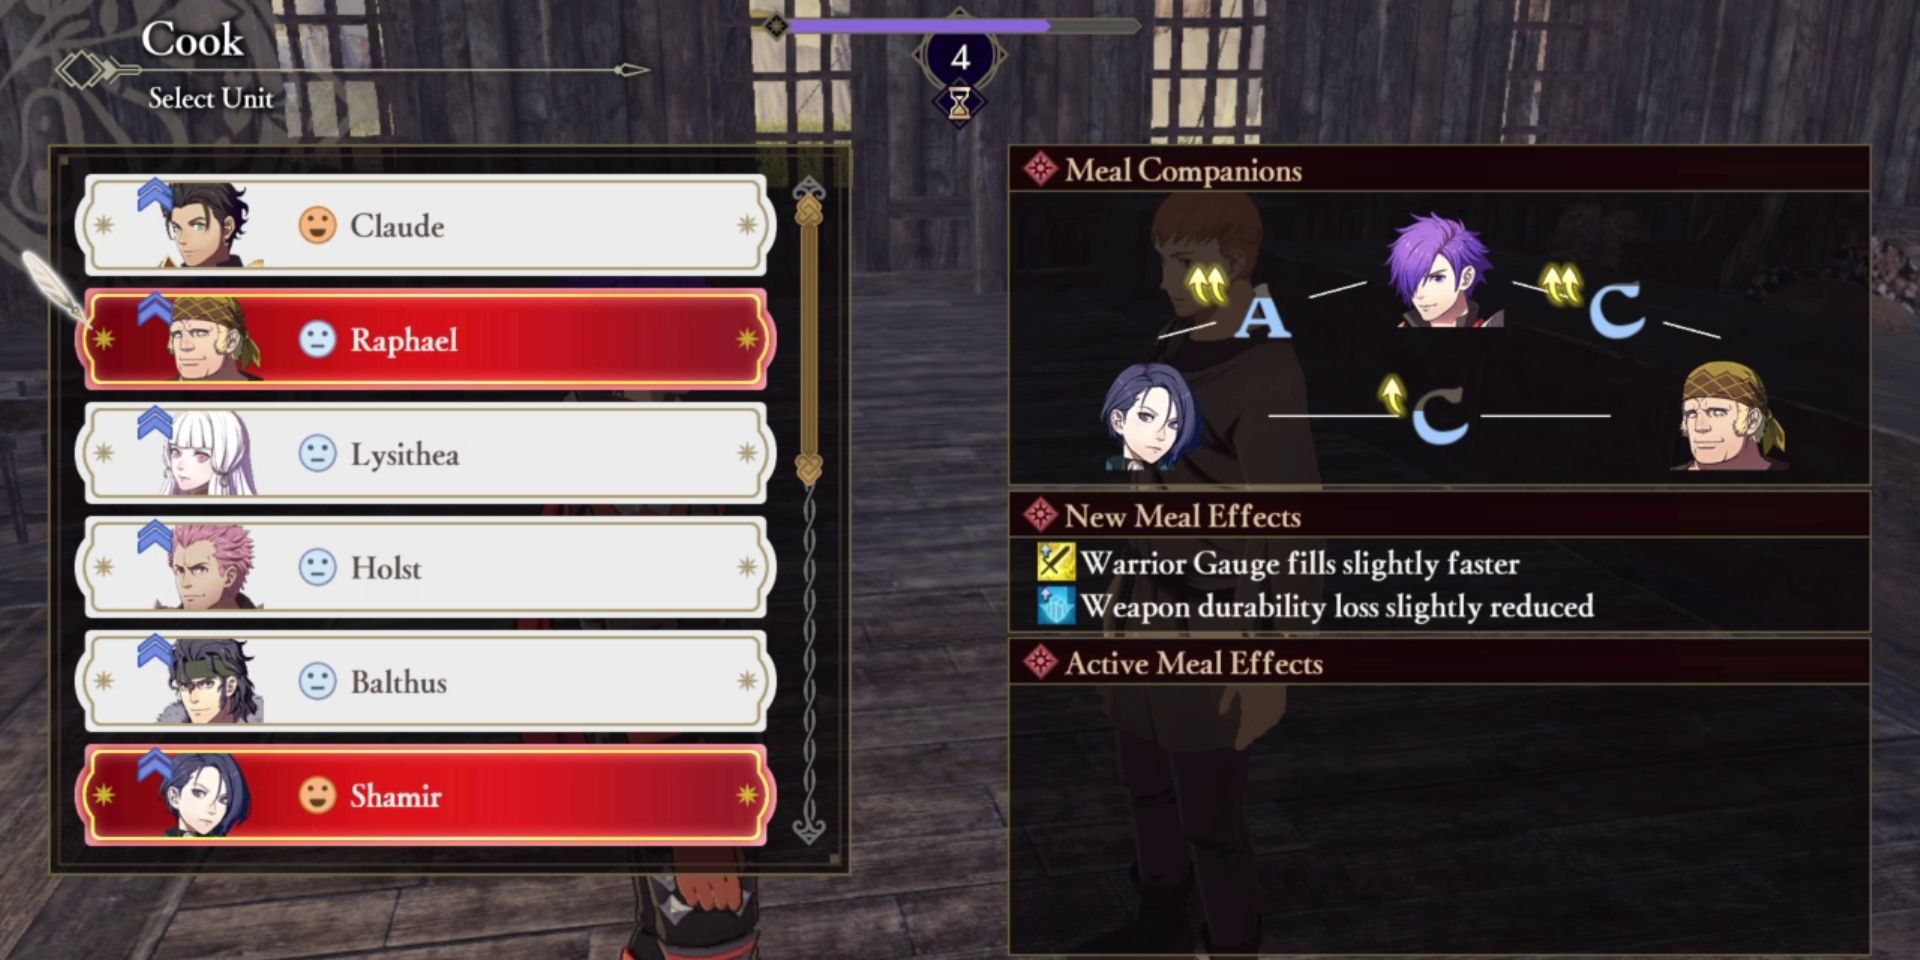 menu screen with "cook: select unit" in the top left corner. below it is a list of characters to choose from. on the right side is box showing a triangle of bond growth between each of the three selected characters and below that are categories titled "new meal effects" and "active meal effects"